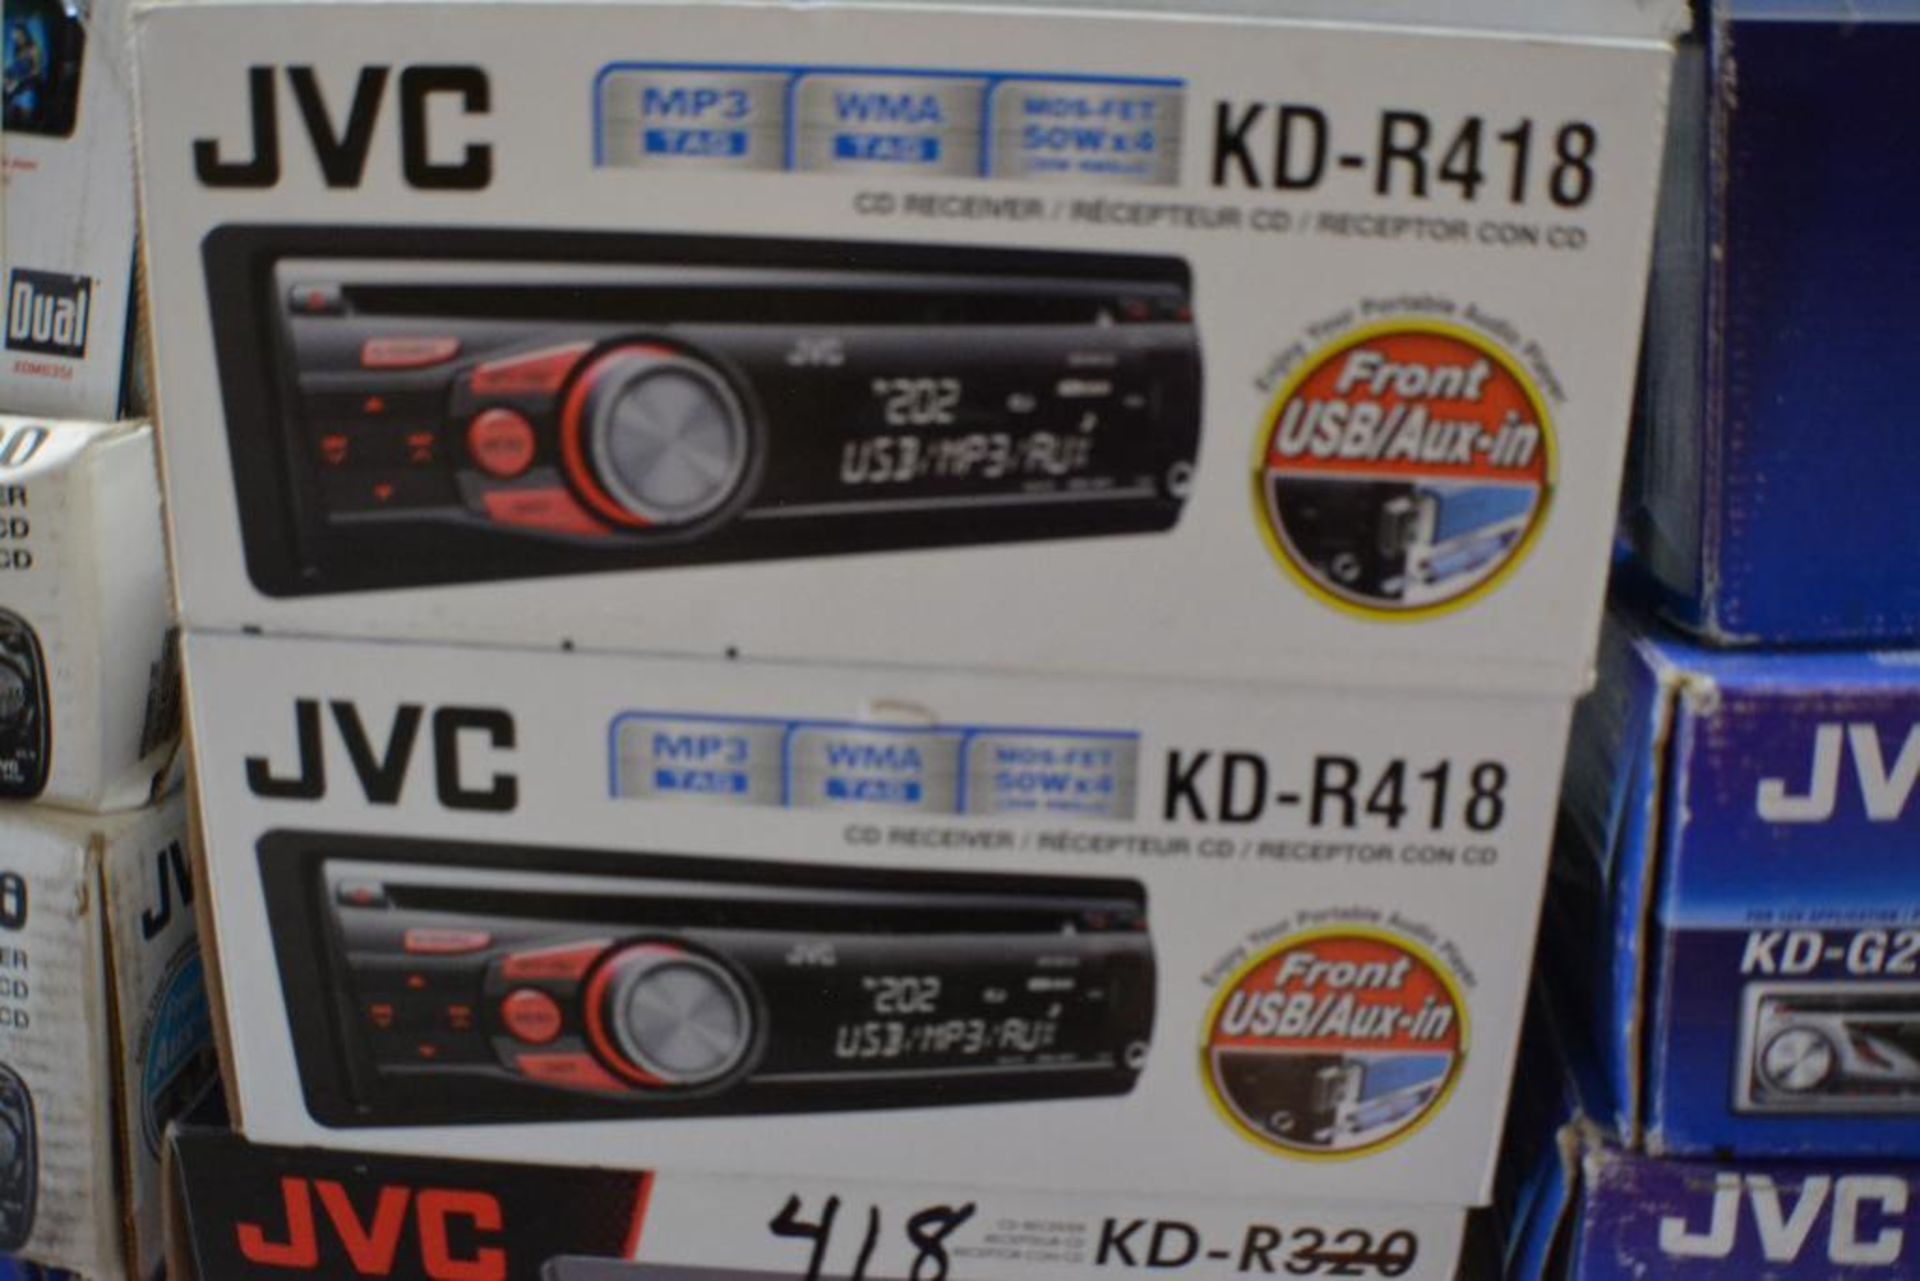 JVC Car Stereo Model KD-R418 In-Dash CD- Receiver with front USB/Aux + MP3 Tag + WMA Tag + MOS-FET 5 - Image 2 of 2